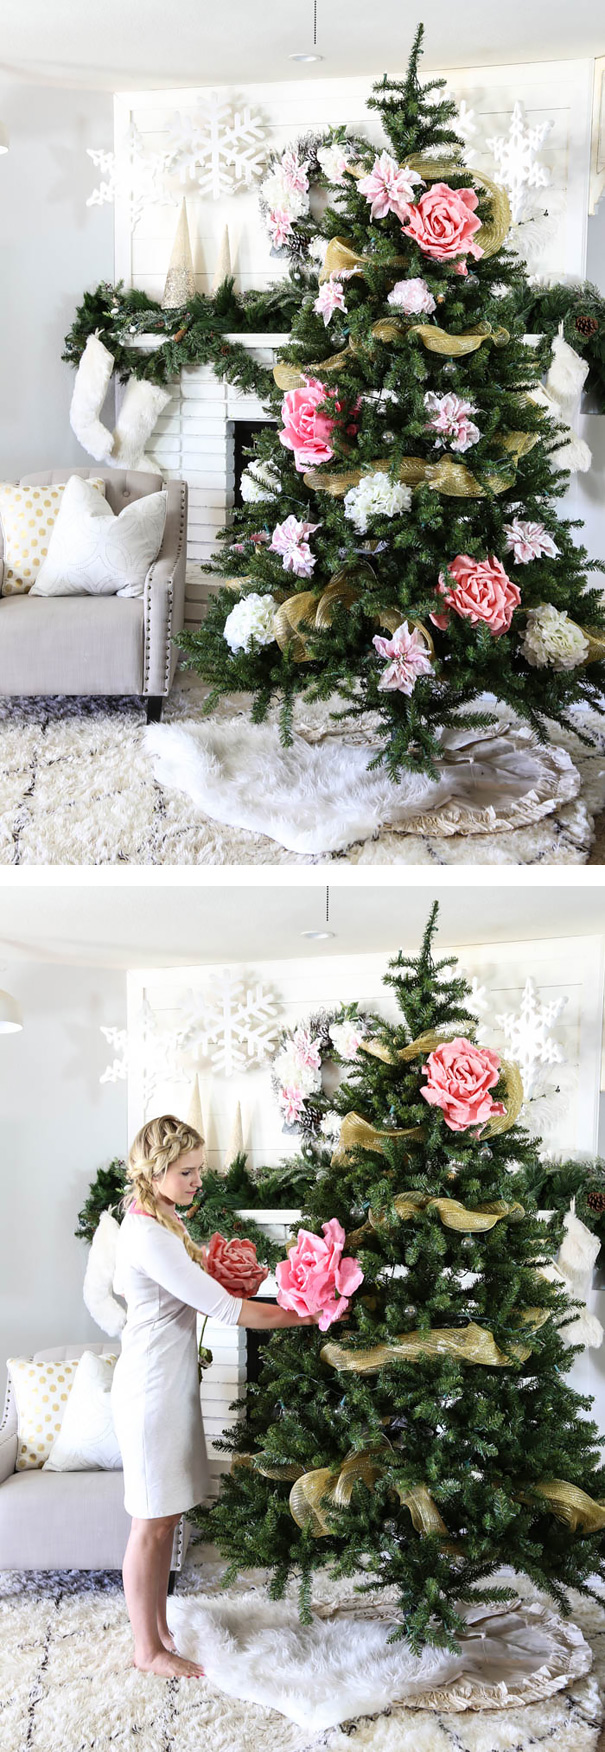 People Are Making Their Christmas Trees Beautiful By Using Flowers